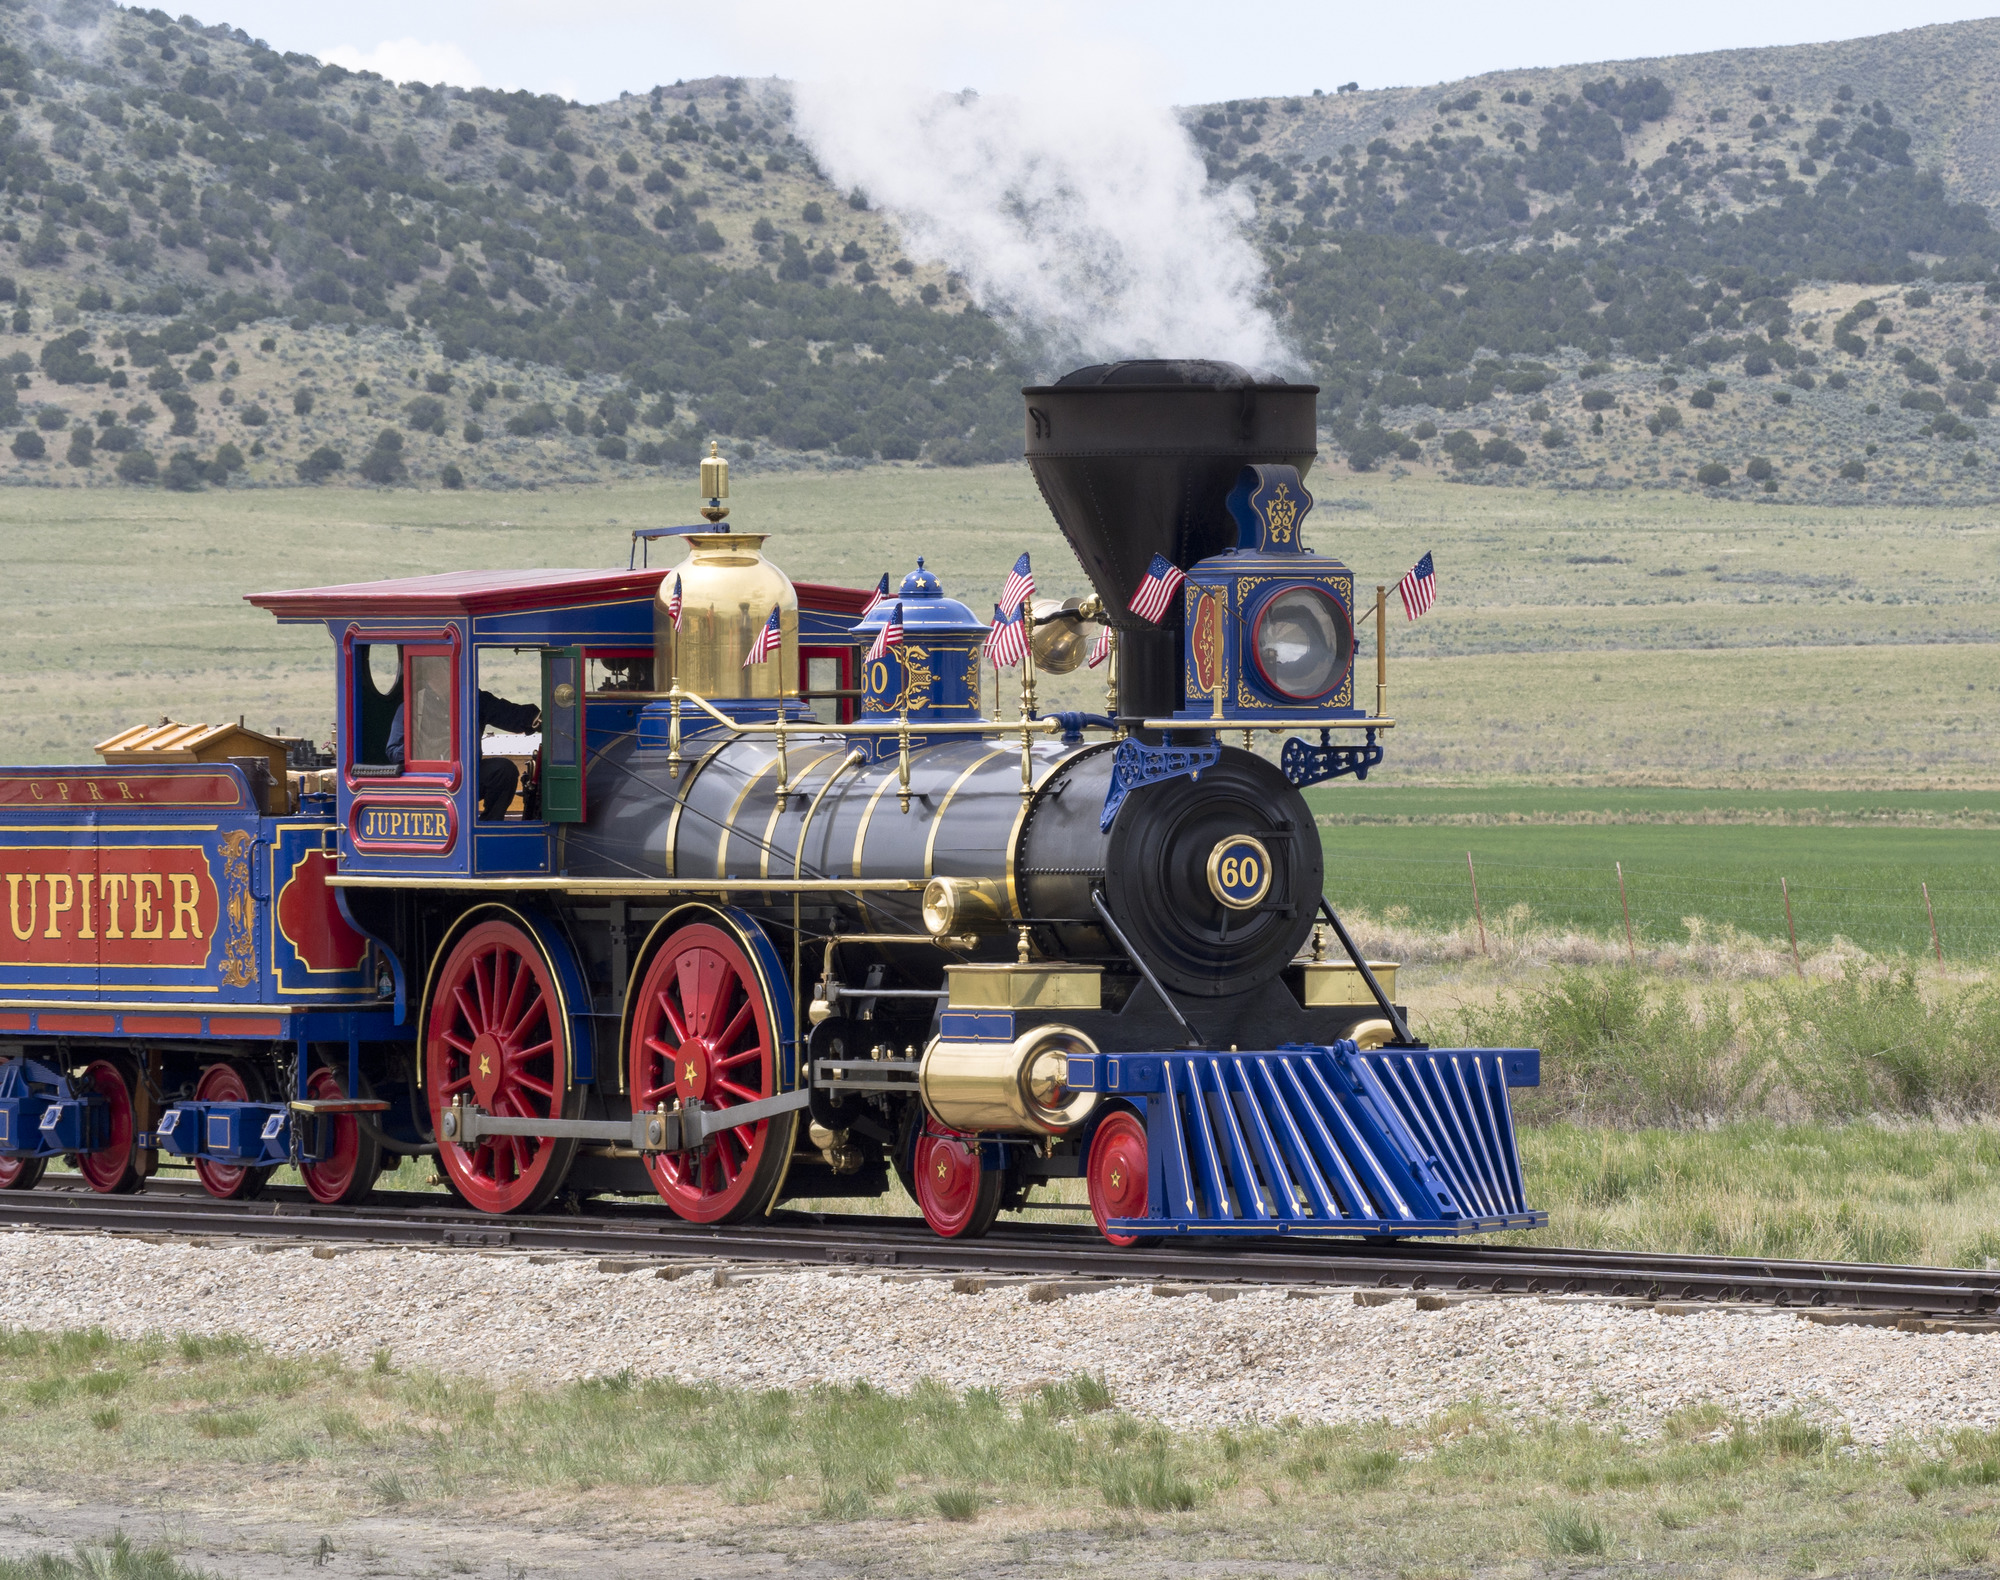 A red, blue, and black steam locomotive decorated with small American flags waving in the wind, moving forward on a railroad in a sparse landscape with hills in the distance. "Jupiter" on the side of the locomotive.